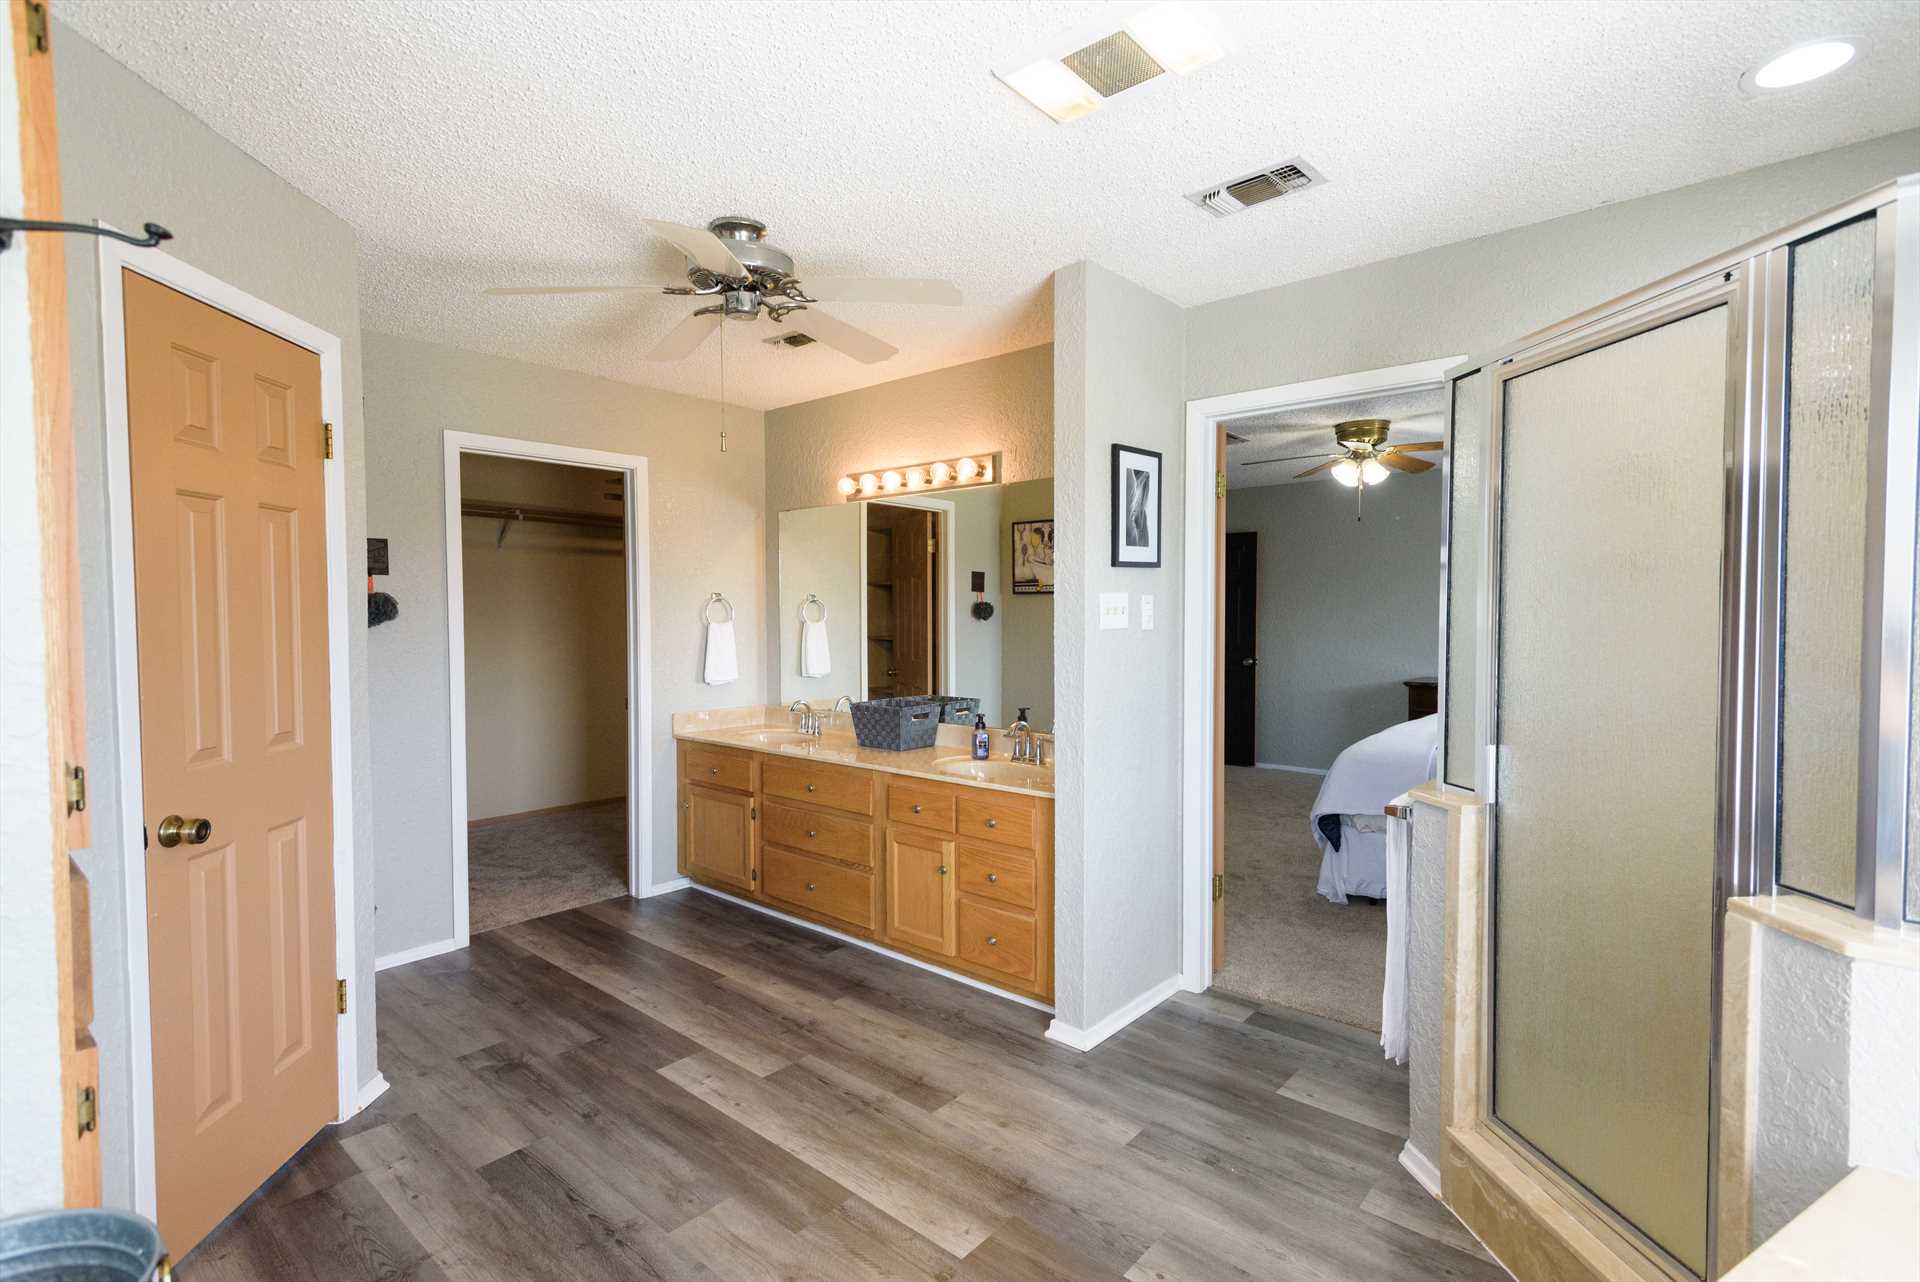                                                 Twin vanities and a great big shower stall make cleanup in the master bath a pleasure!